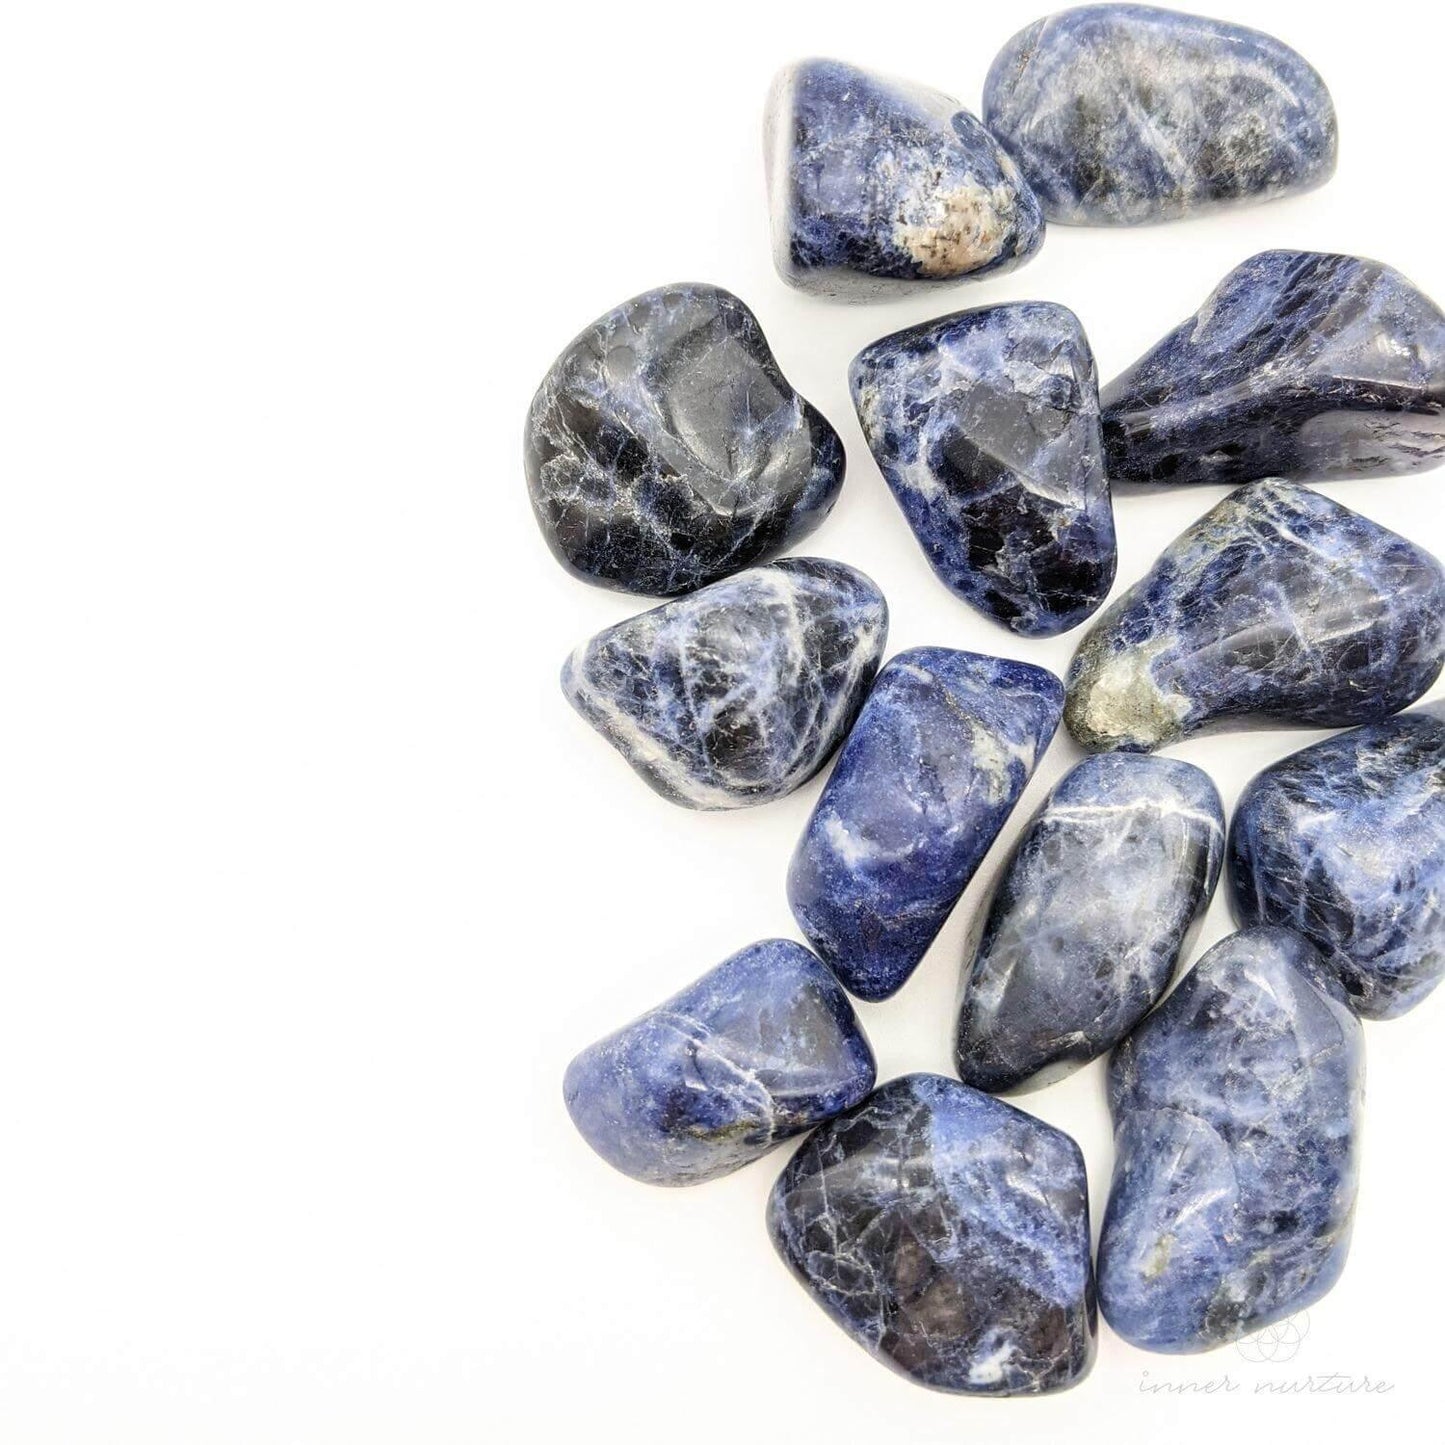 Sodalite Tumble - Crystal Shop Australia | Inner Nurture - Ethically Sourced - Buy Crystals Online